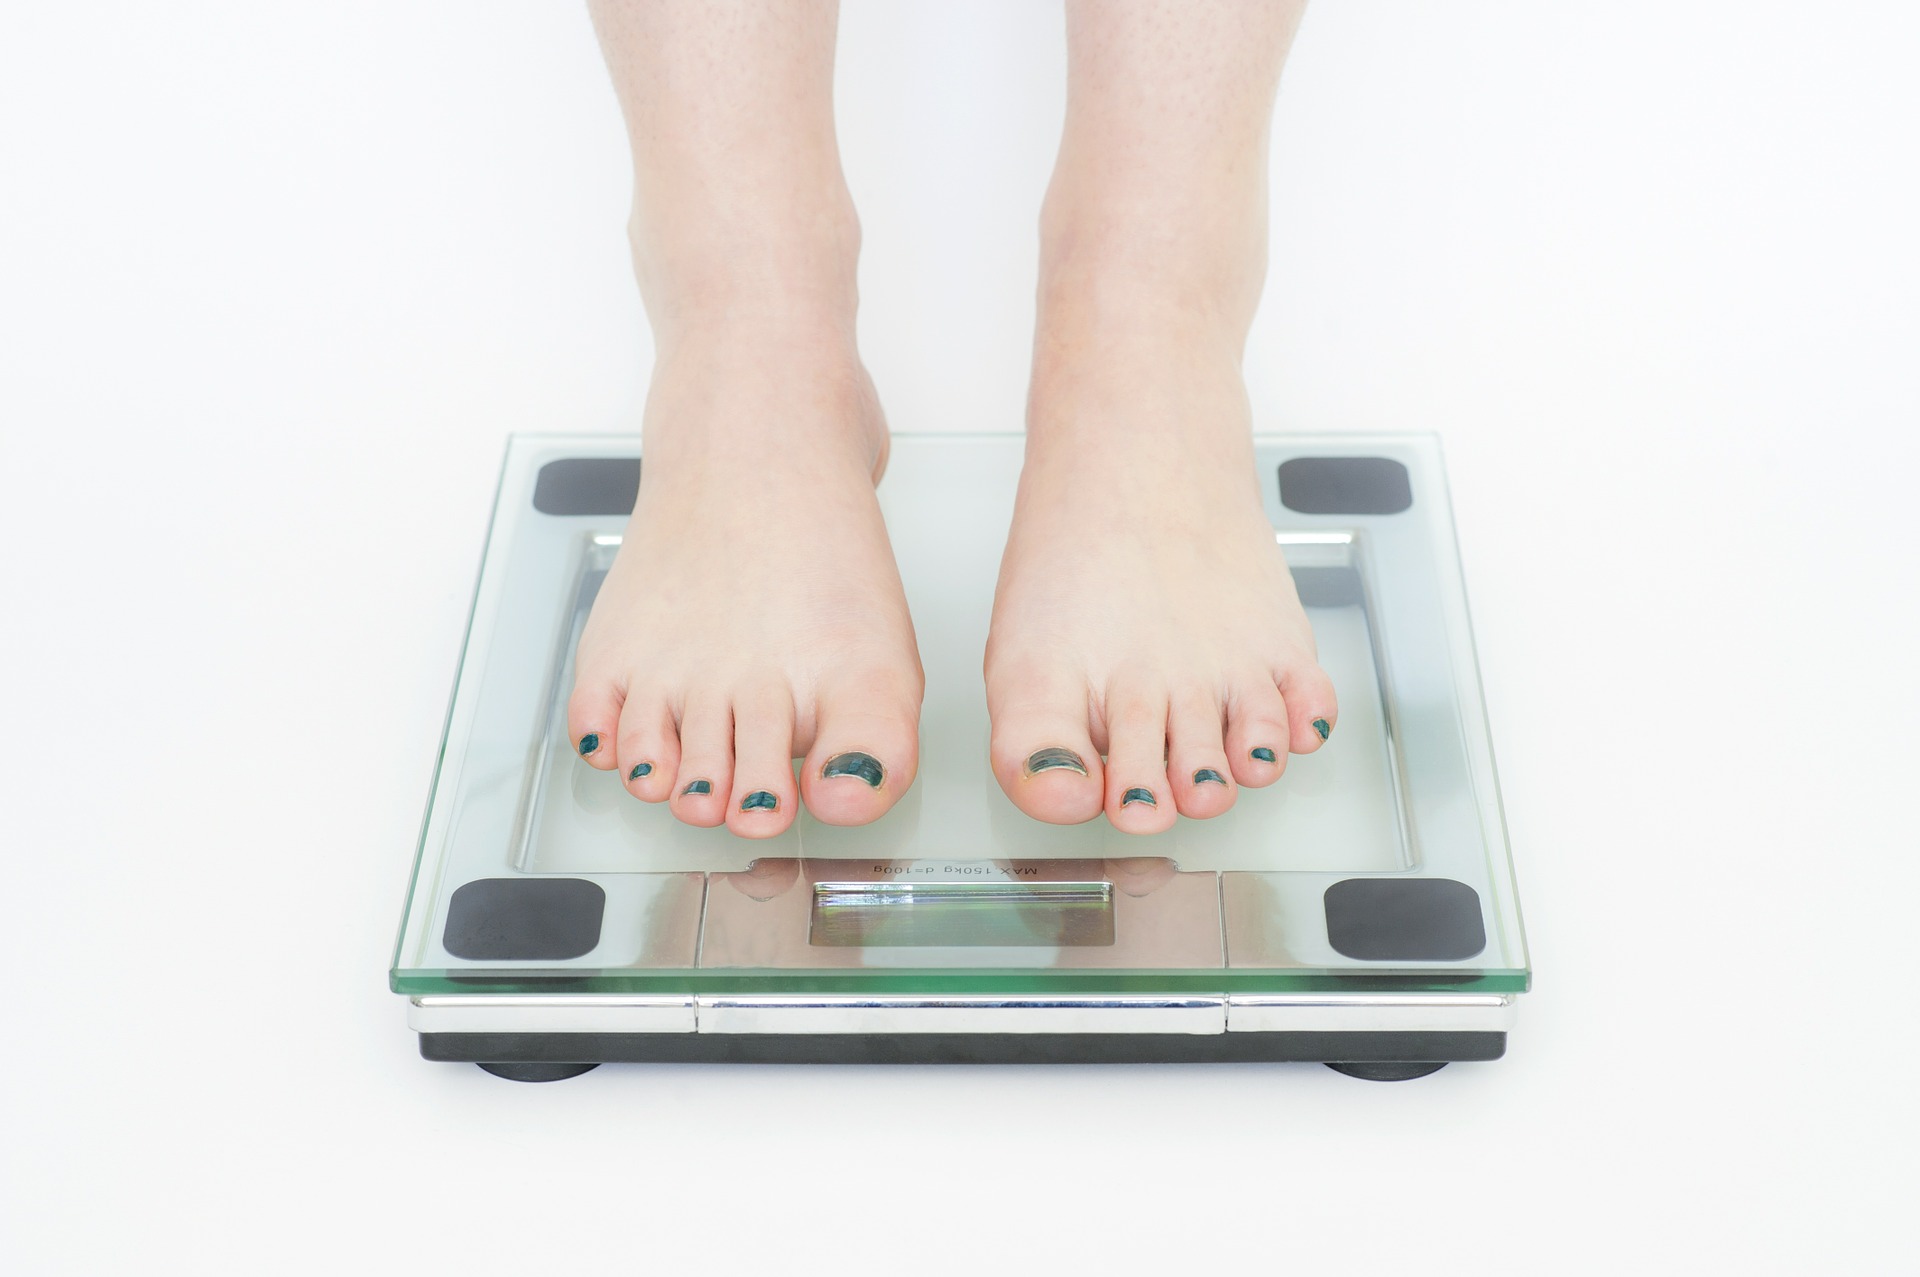 weighing yourself is information to track about keto